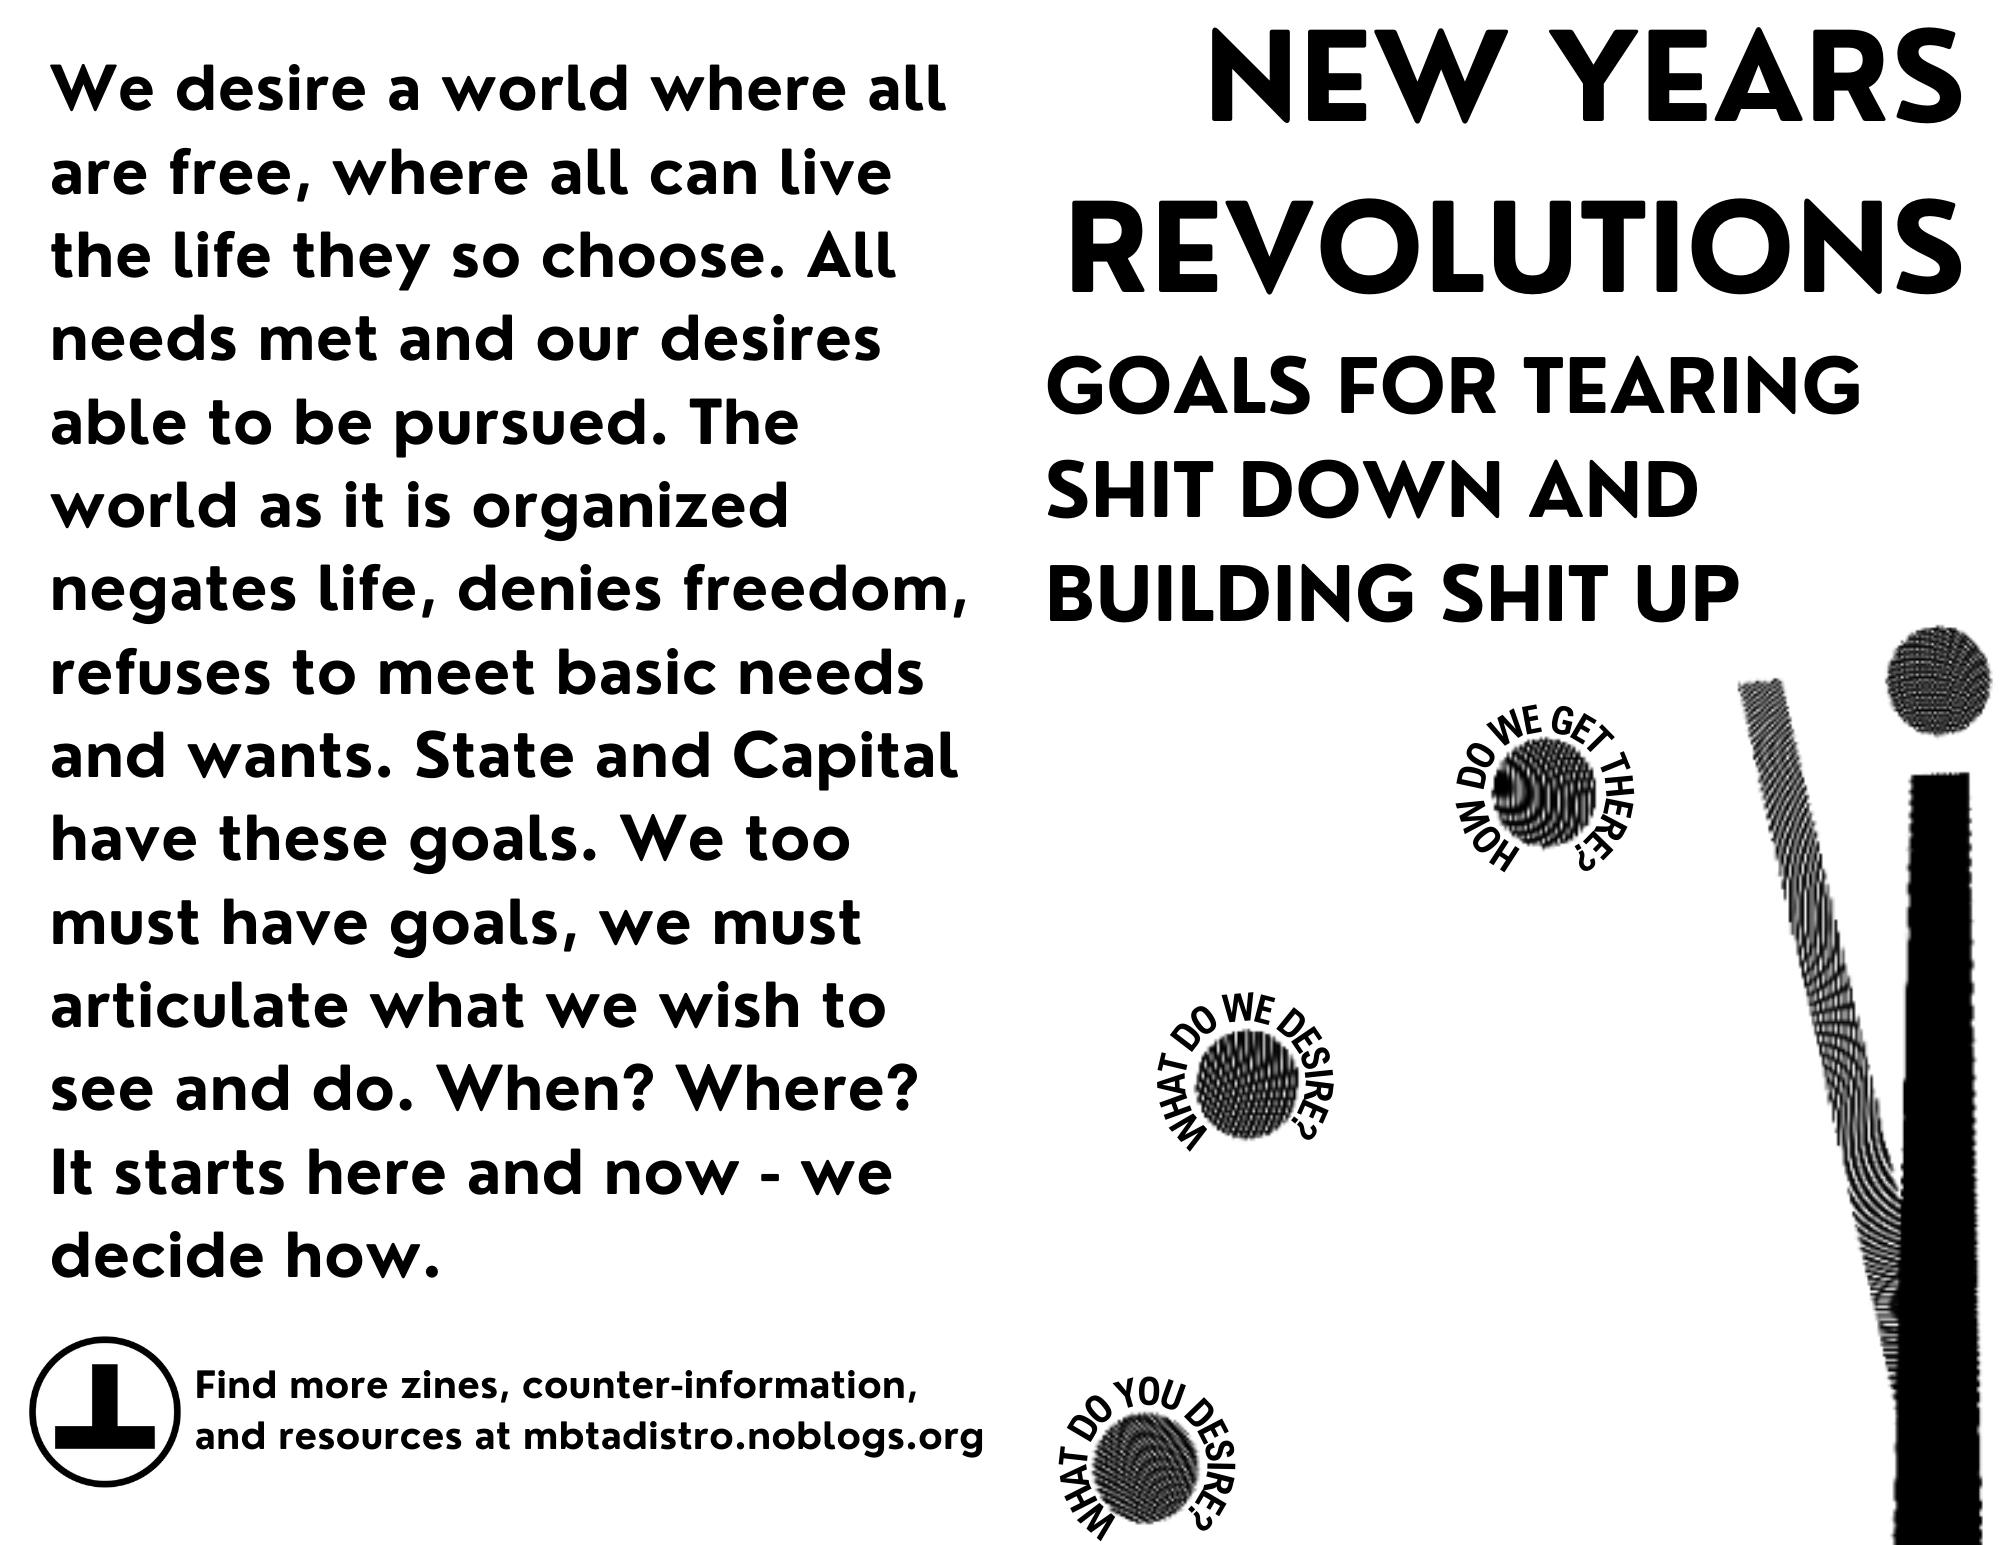 Cover of a zine. The front cover has the hands of a clock and dots representing the numbers. It reads "New Years Revolutions: Goals for Tearing Shit Down and Building Shit Up." On the dots representing numbers are the words "What do you desire? What do we desire? How do we get there?" The back cover reads "We desire a world where all are free, where all can live the life they so choose. All needs met and our desires able to be pursued. The world as it is organized negates life, denies freedom, refuses to meet basic needs and wants. State and Capital have these goals. We too must have goals, we must articulate what we wish to see and do. When? Where? It starts here and now - we decide how."